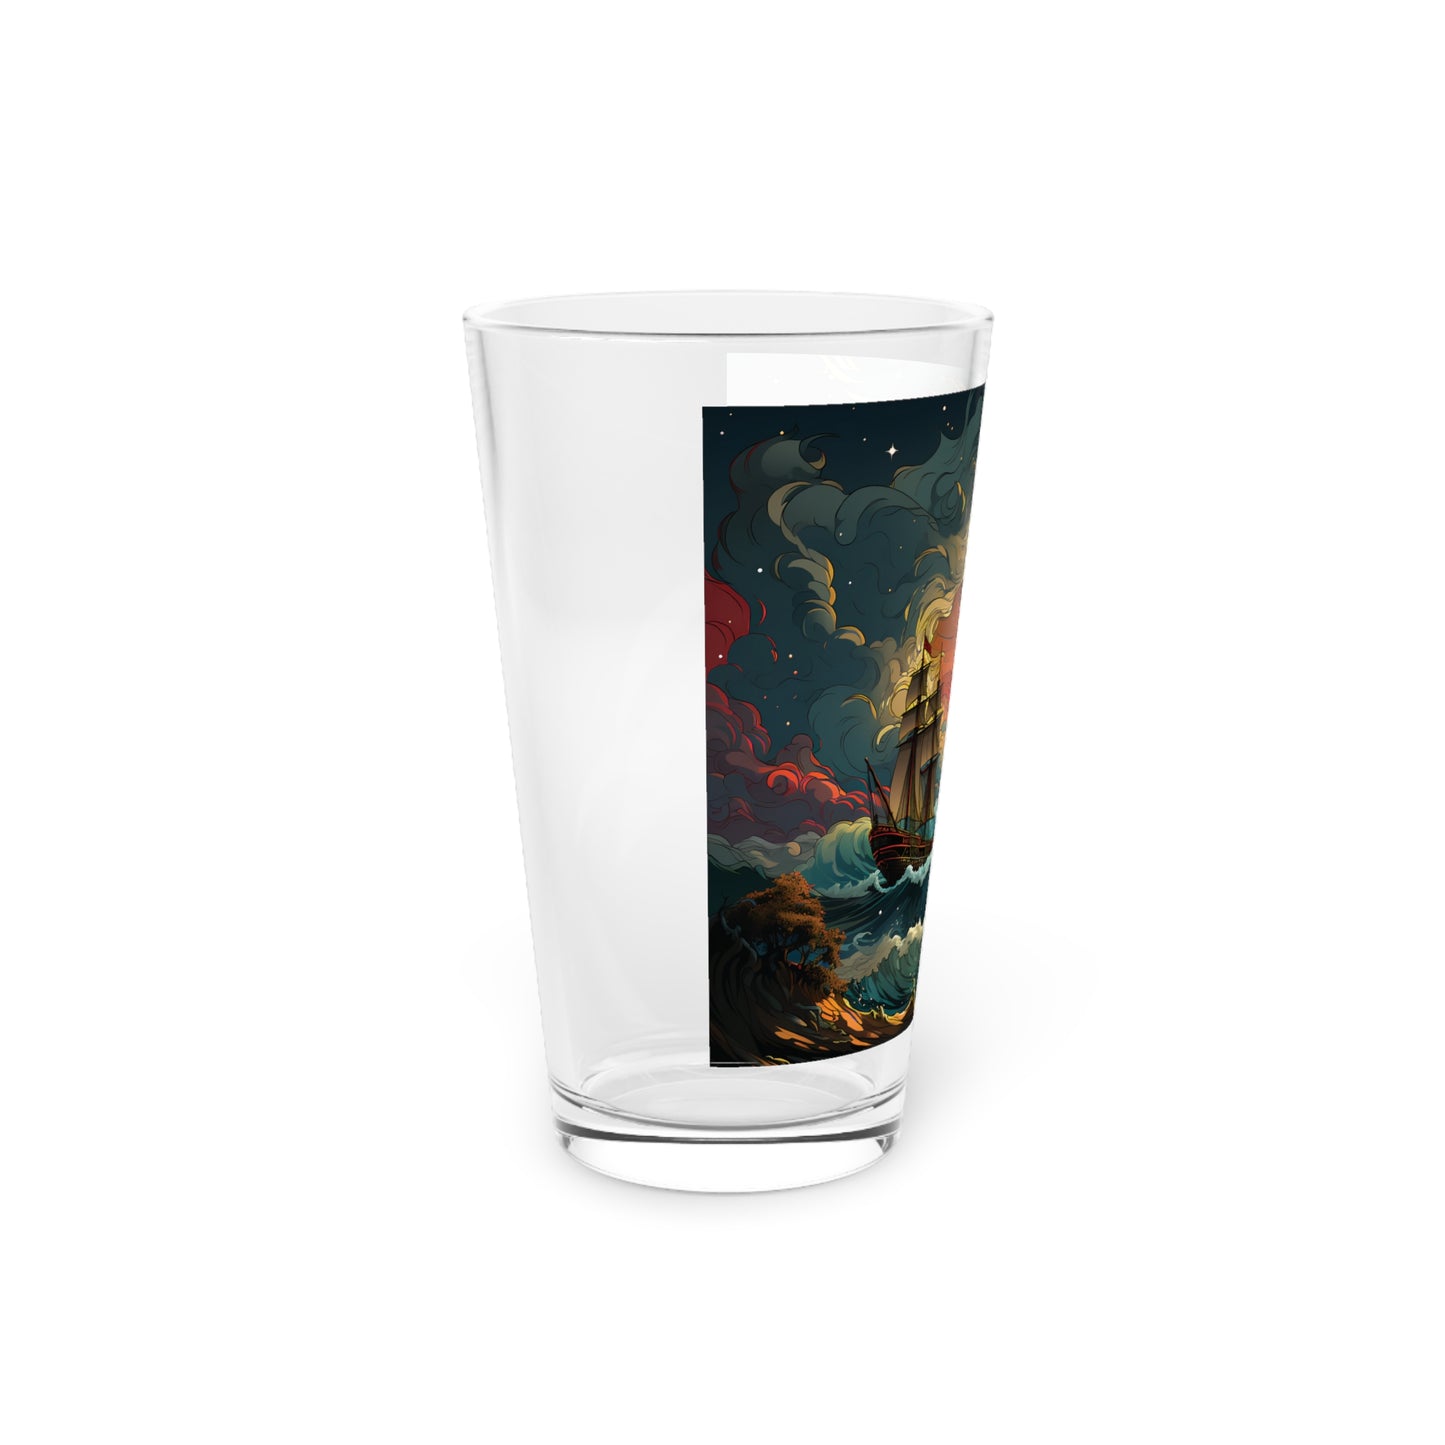 Enchant your drinking experience with our Tarot Card Style Ocean Waves Pint Glass (16oz) - Waves Design #030. Crafted by Stashbox.ai, this glass showcases tarot mysticism with ocean waves and a sailing ship. Embrace the mystic with this captivating glassware.